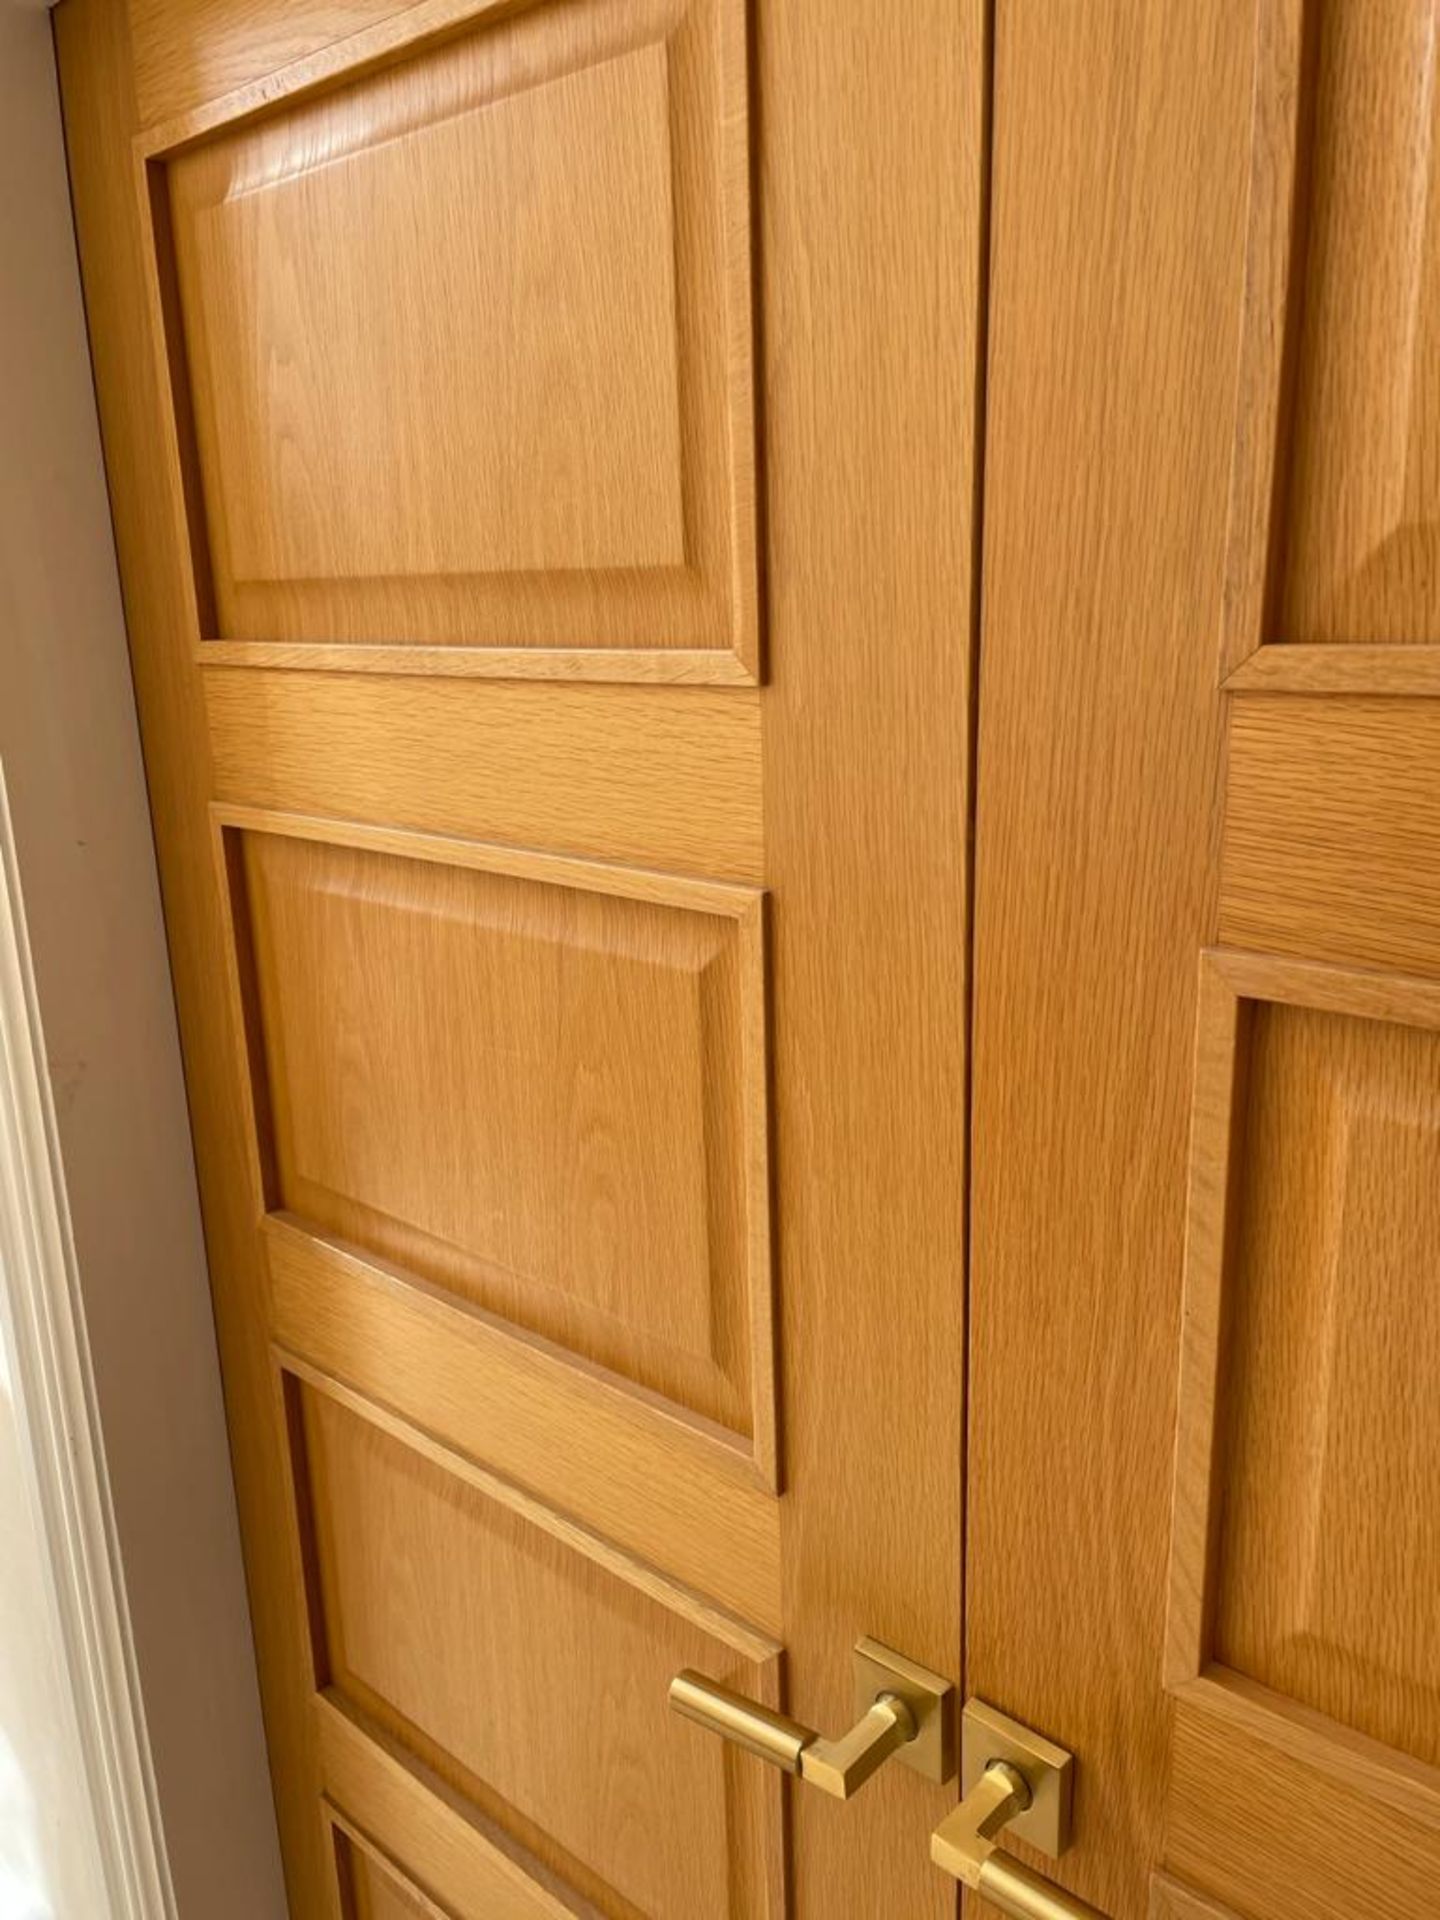 1 x Set of Roble Solid Oak Internal Double Doors - 45mm Thickness Fire Doors - NO VAT ON THE - Image 2 of 10